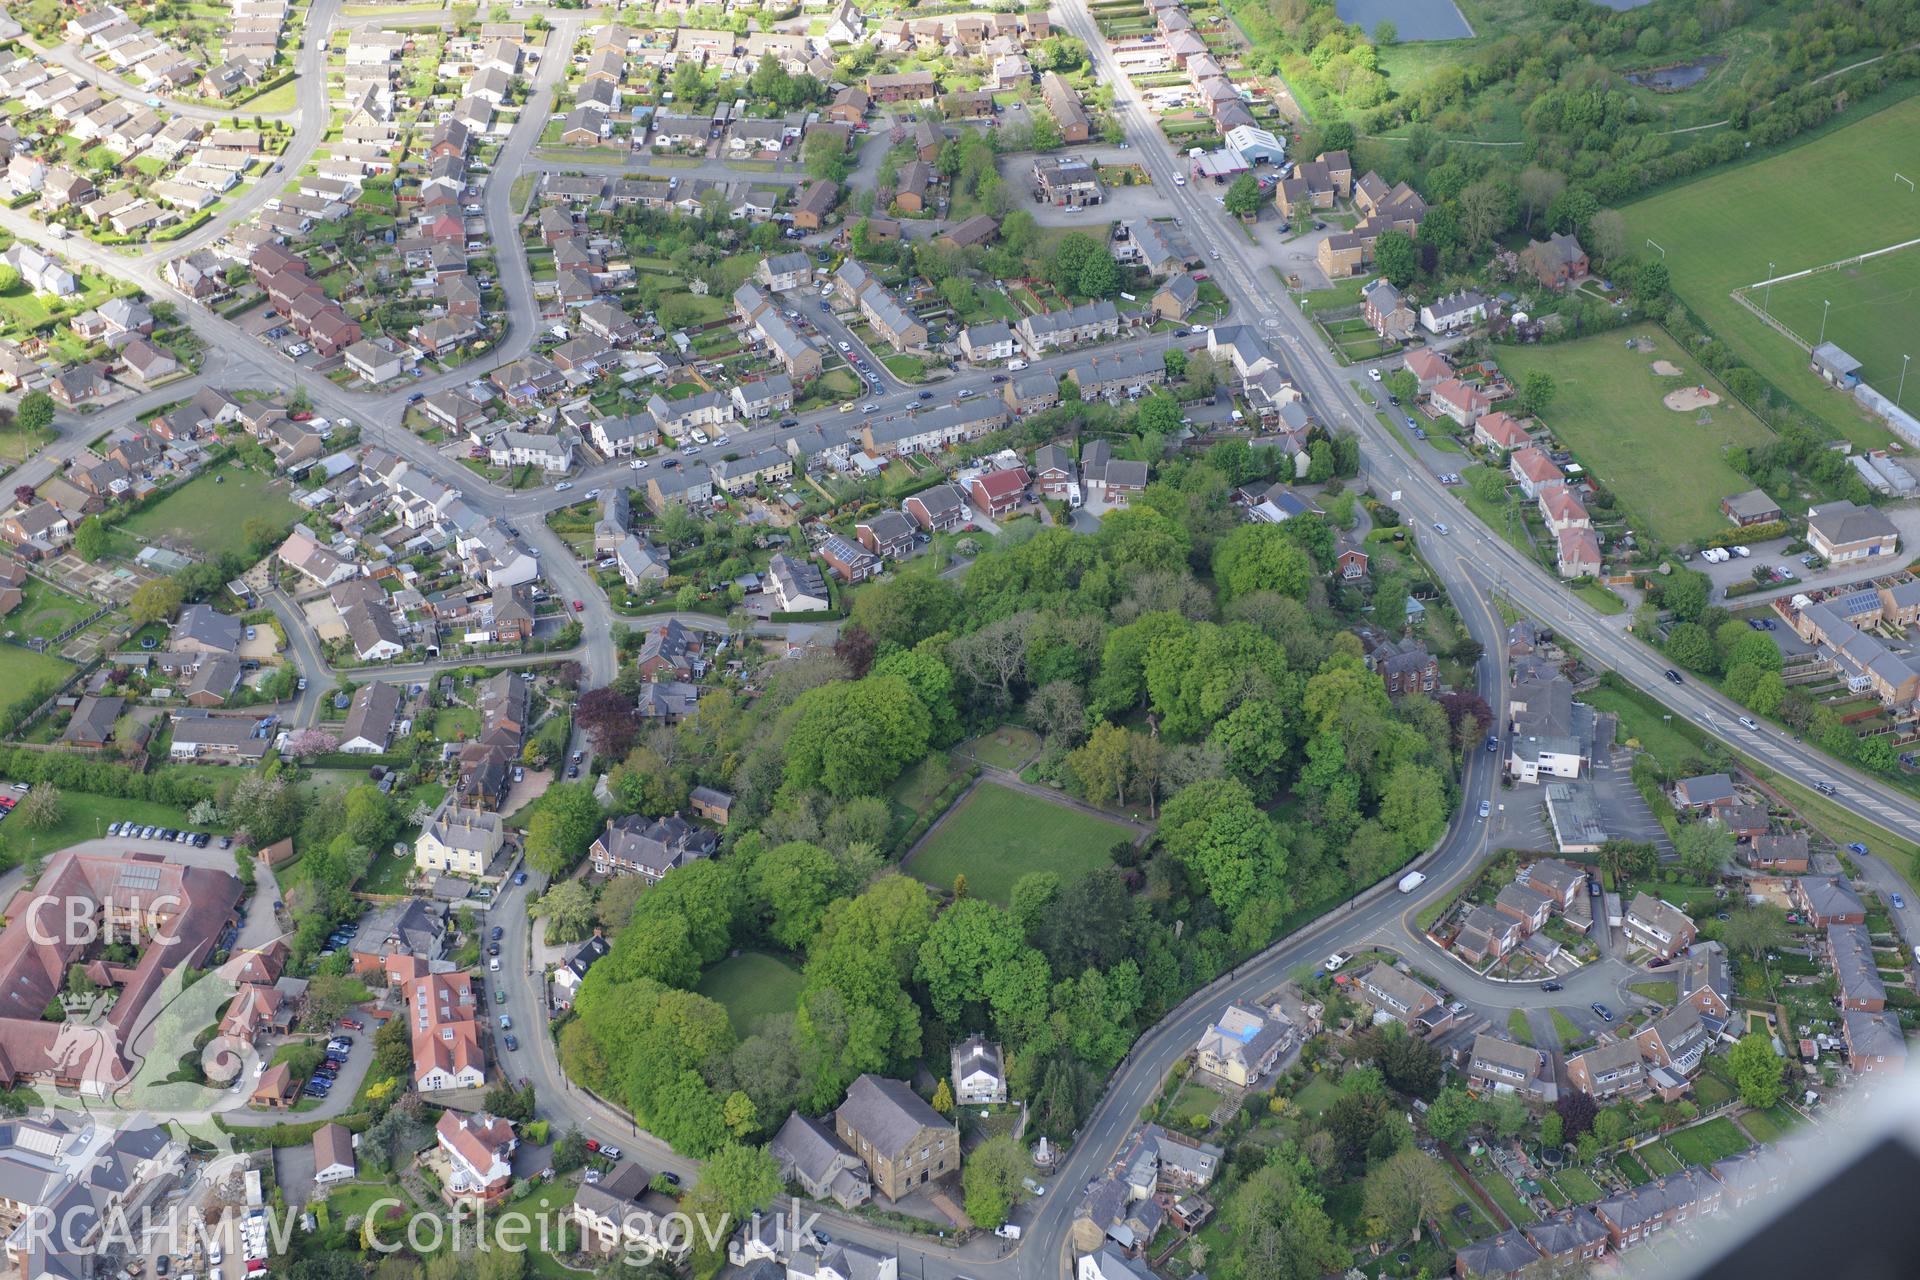 The town of Mold, with Mold Castle and Pendref Welsh Weslseyan Methodist Church visible. Oblique aerial photograph taken during the Royal Commission?s programme of archaeological aerial reconnaissance by Toby Driver on 22nd May 2013.